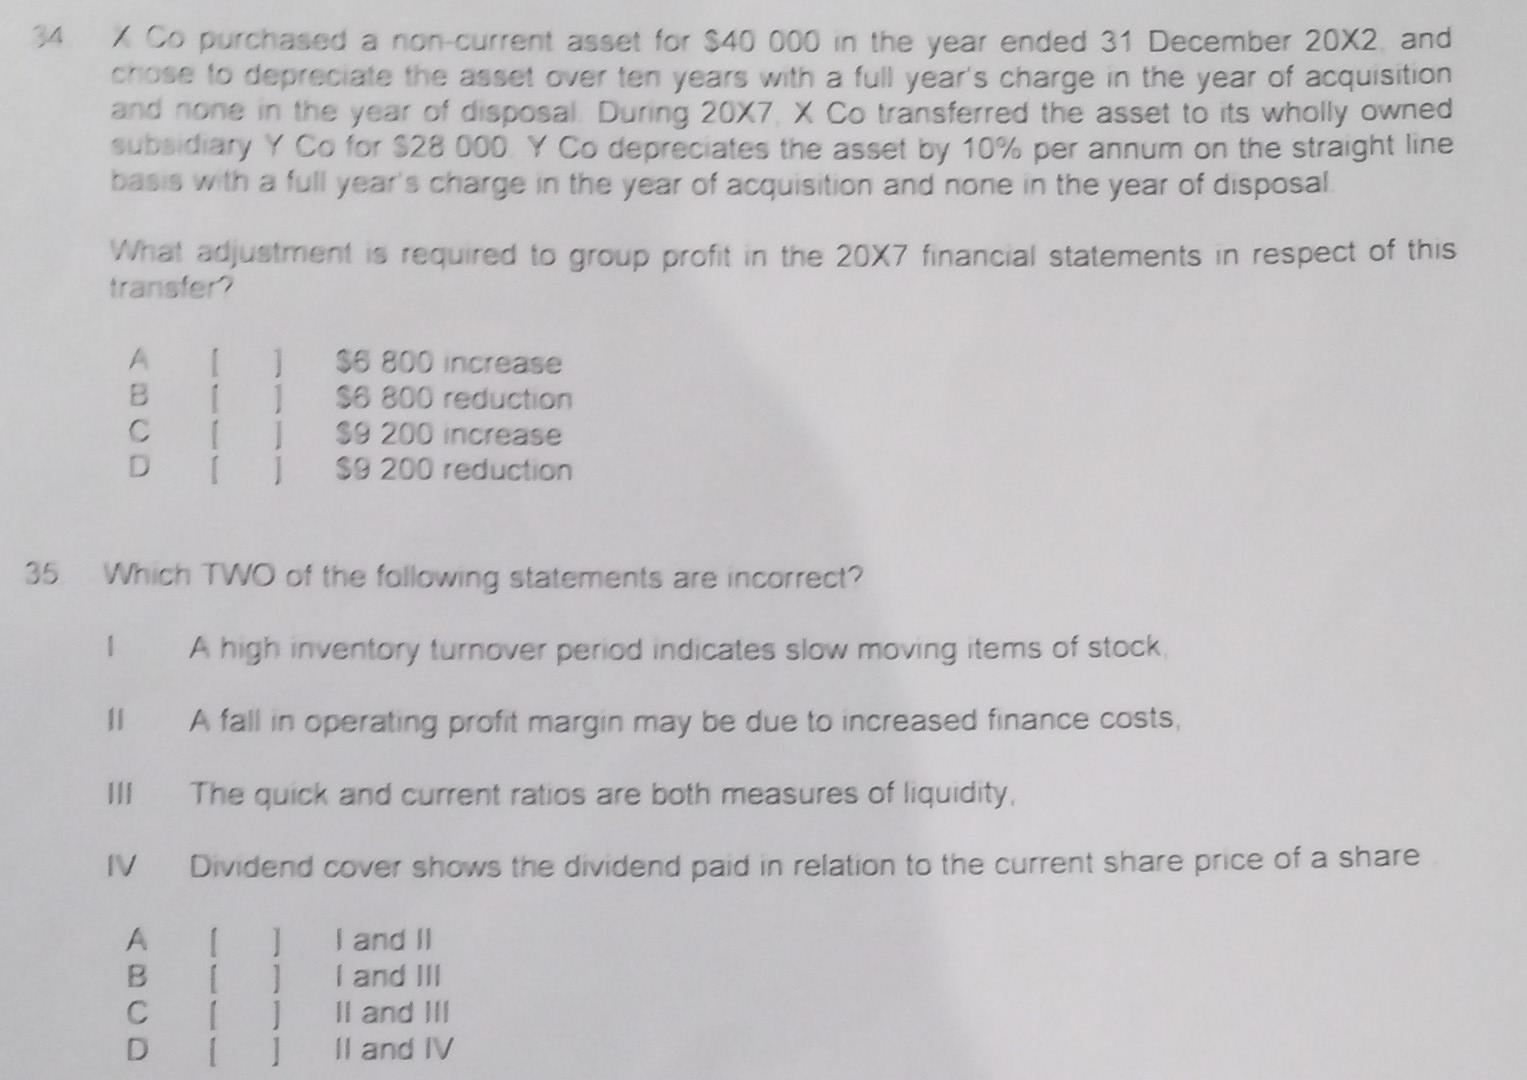 35 X Co purchased a non-current asset for $40 000 in the year ended 31 December 20X2 and chose to depreciate